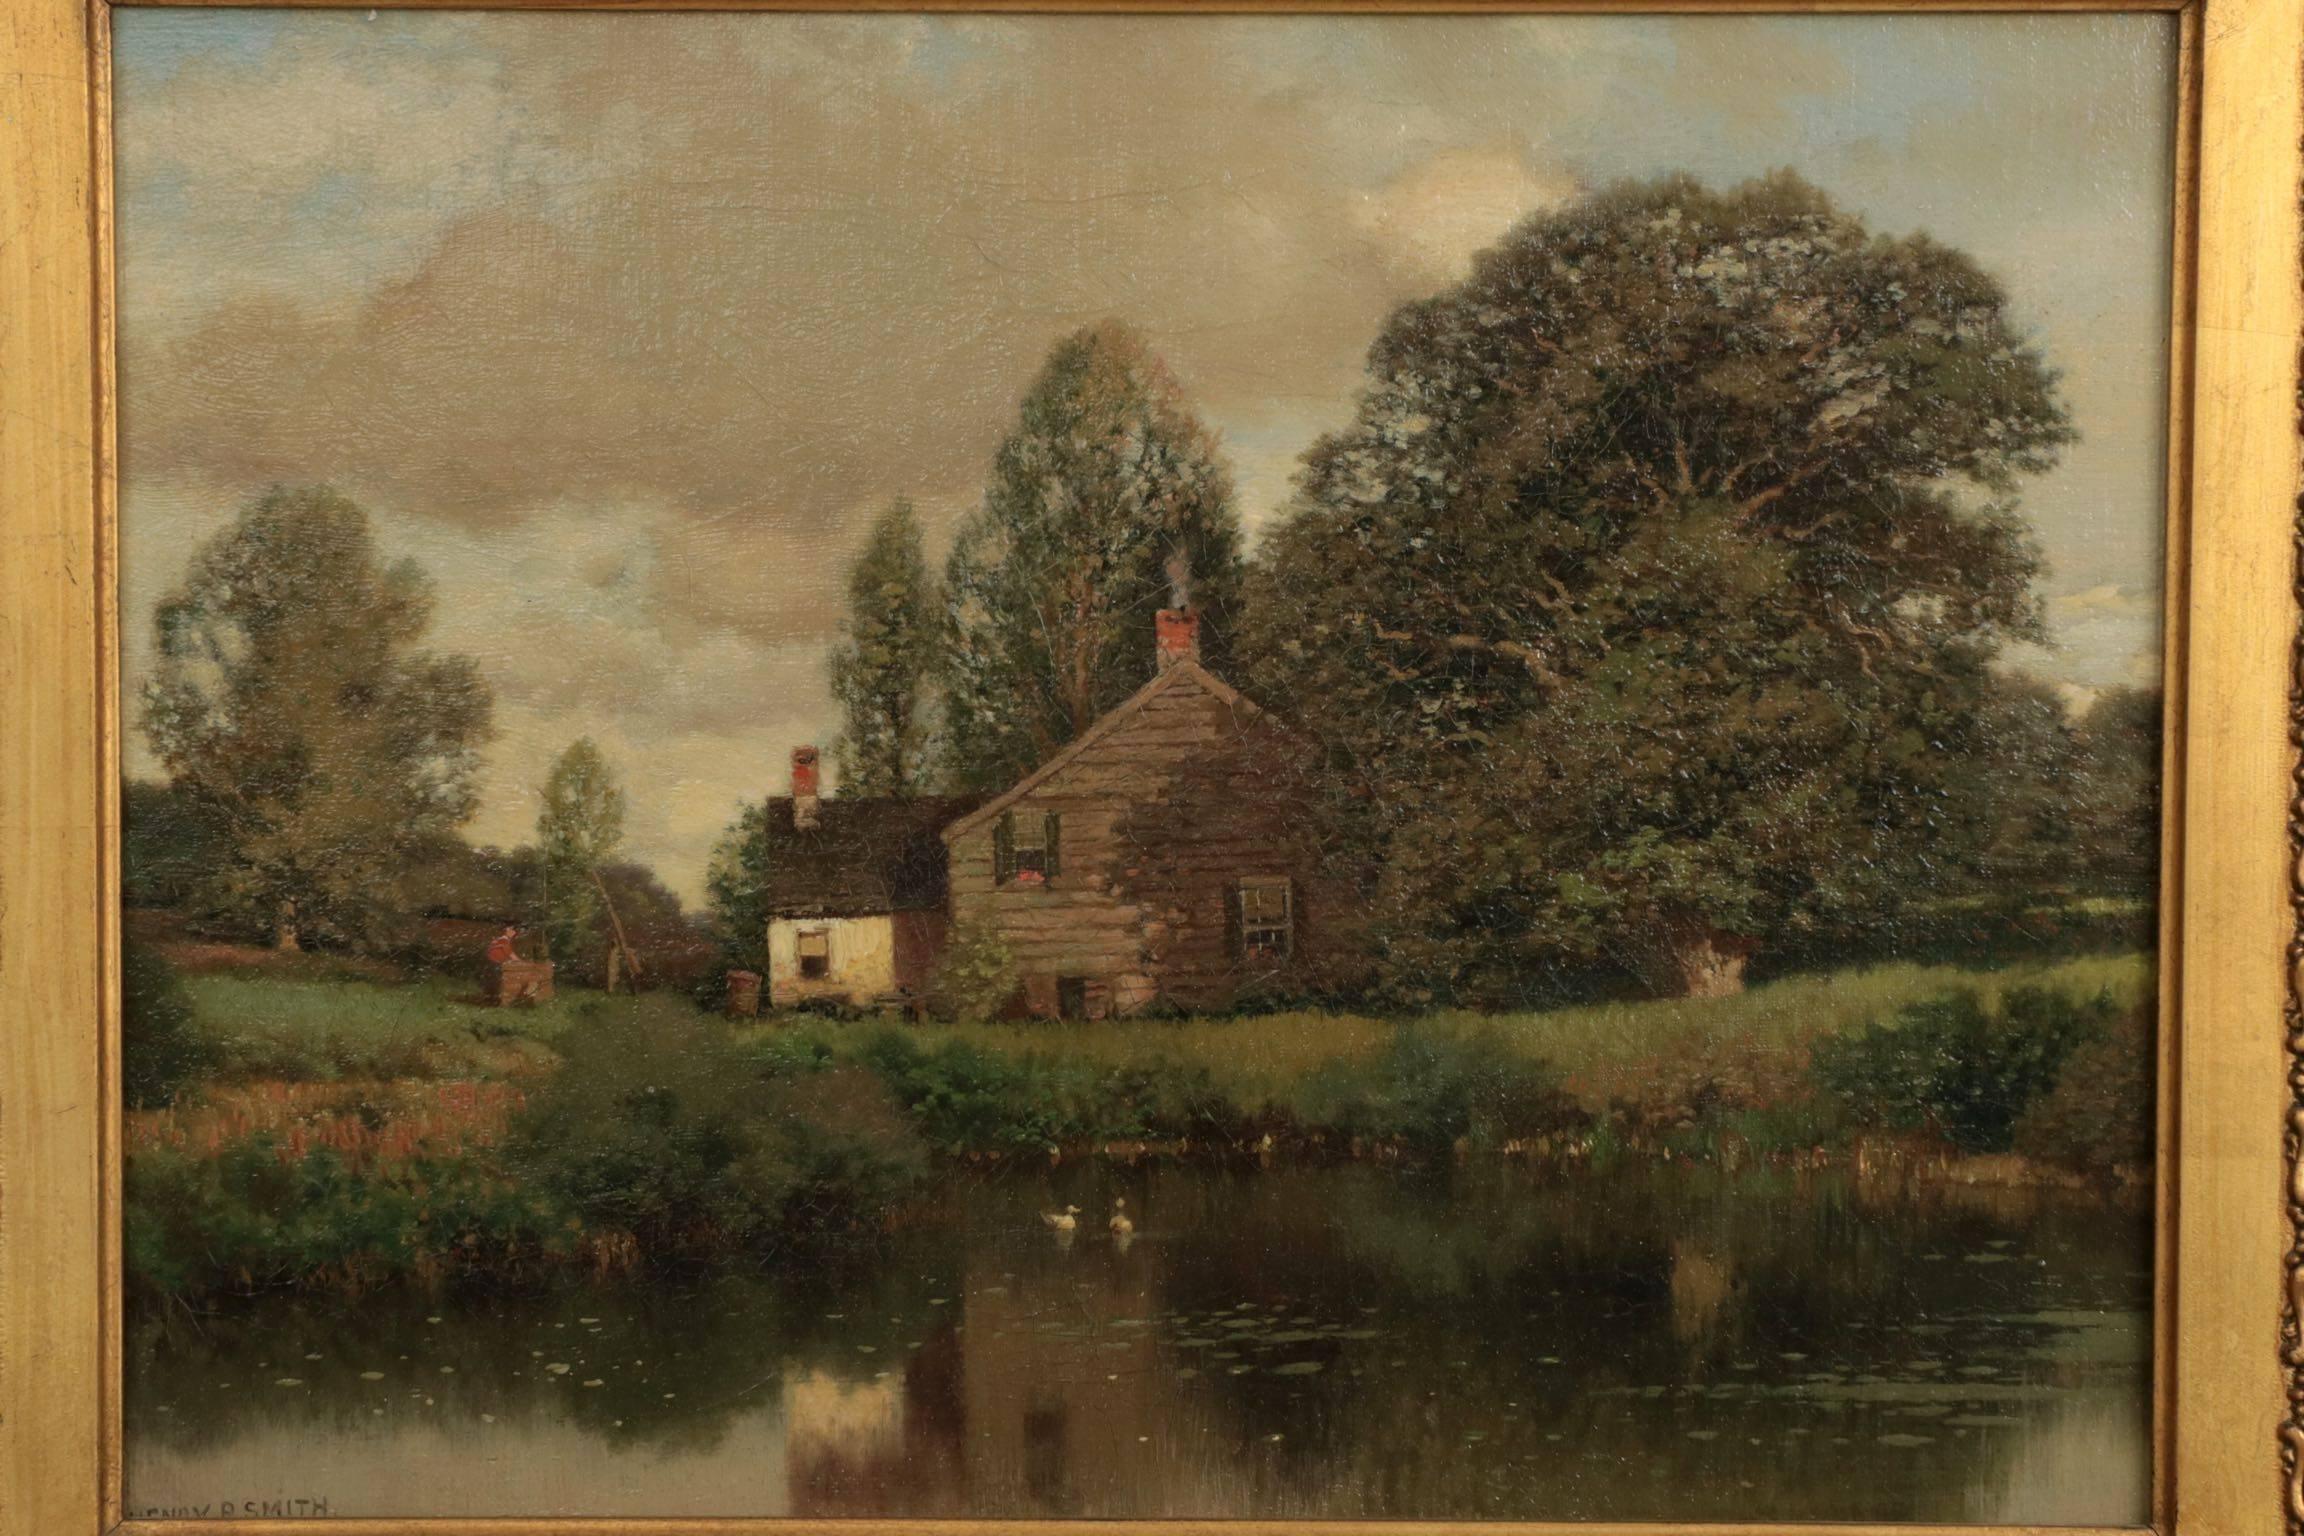 Hand-Painted 'Cottage by Lake' Landscape Painting by Henry Pember Smith